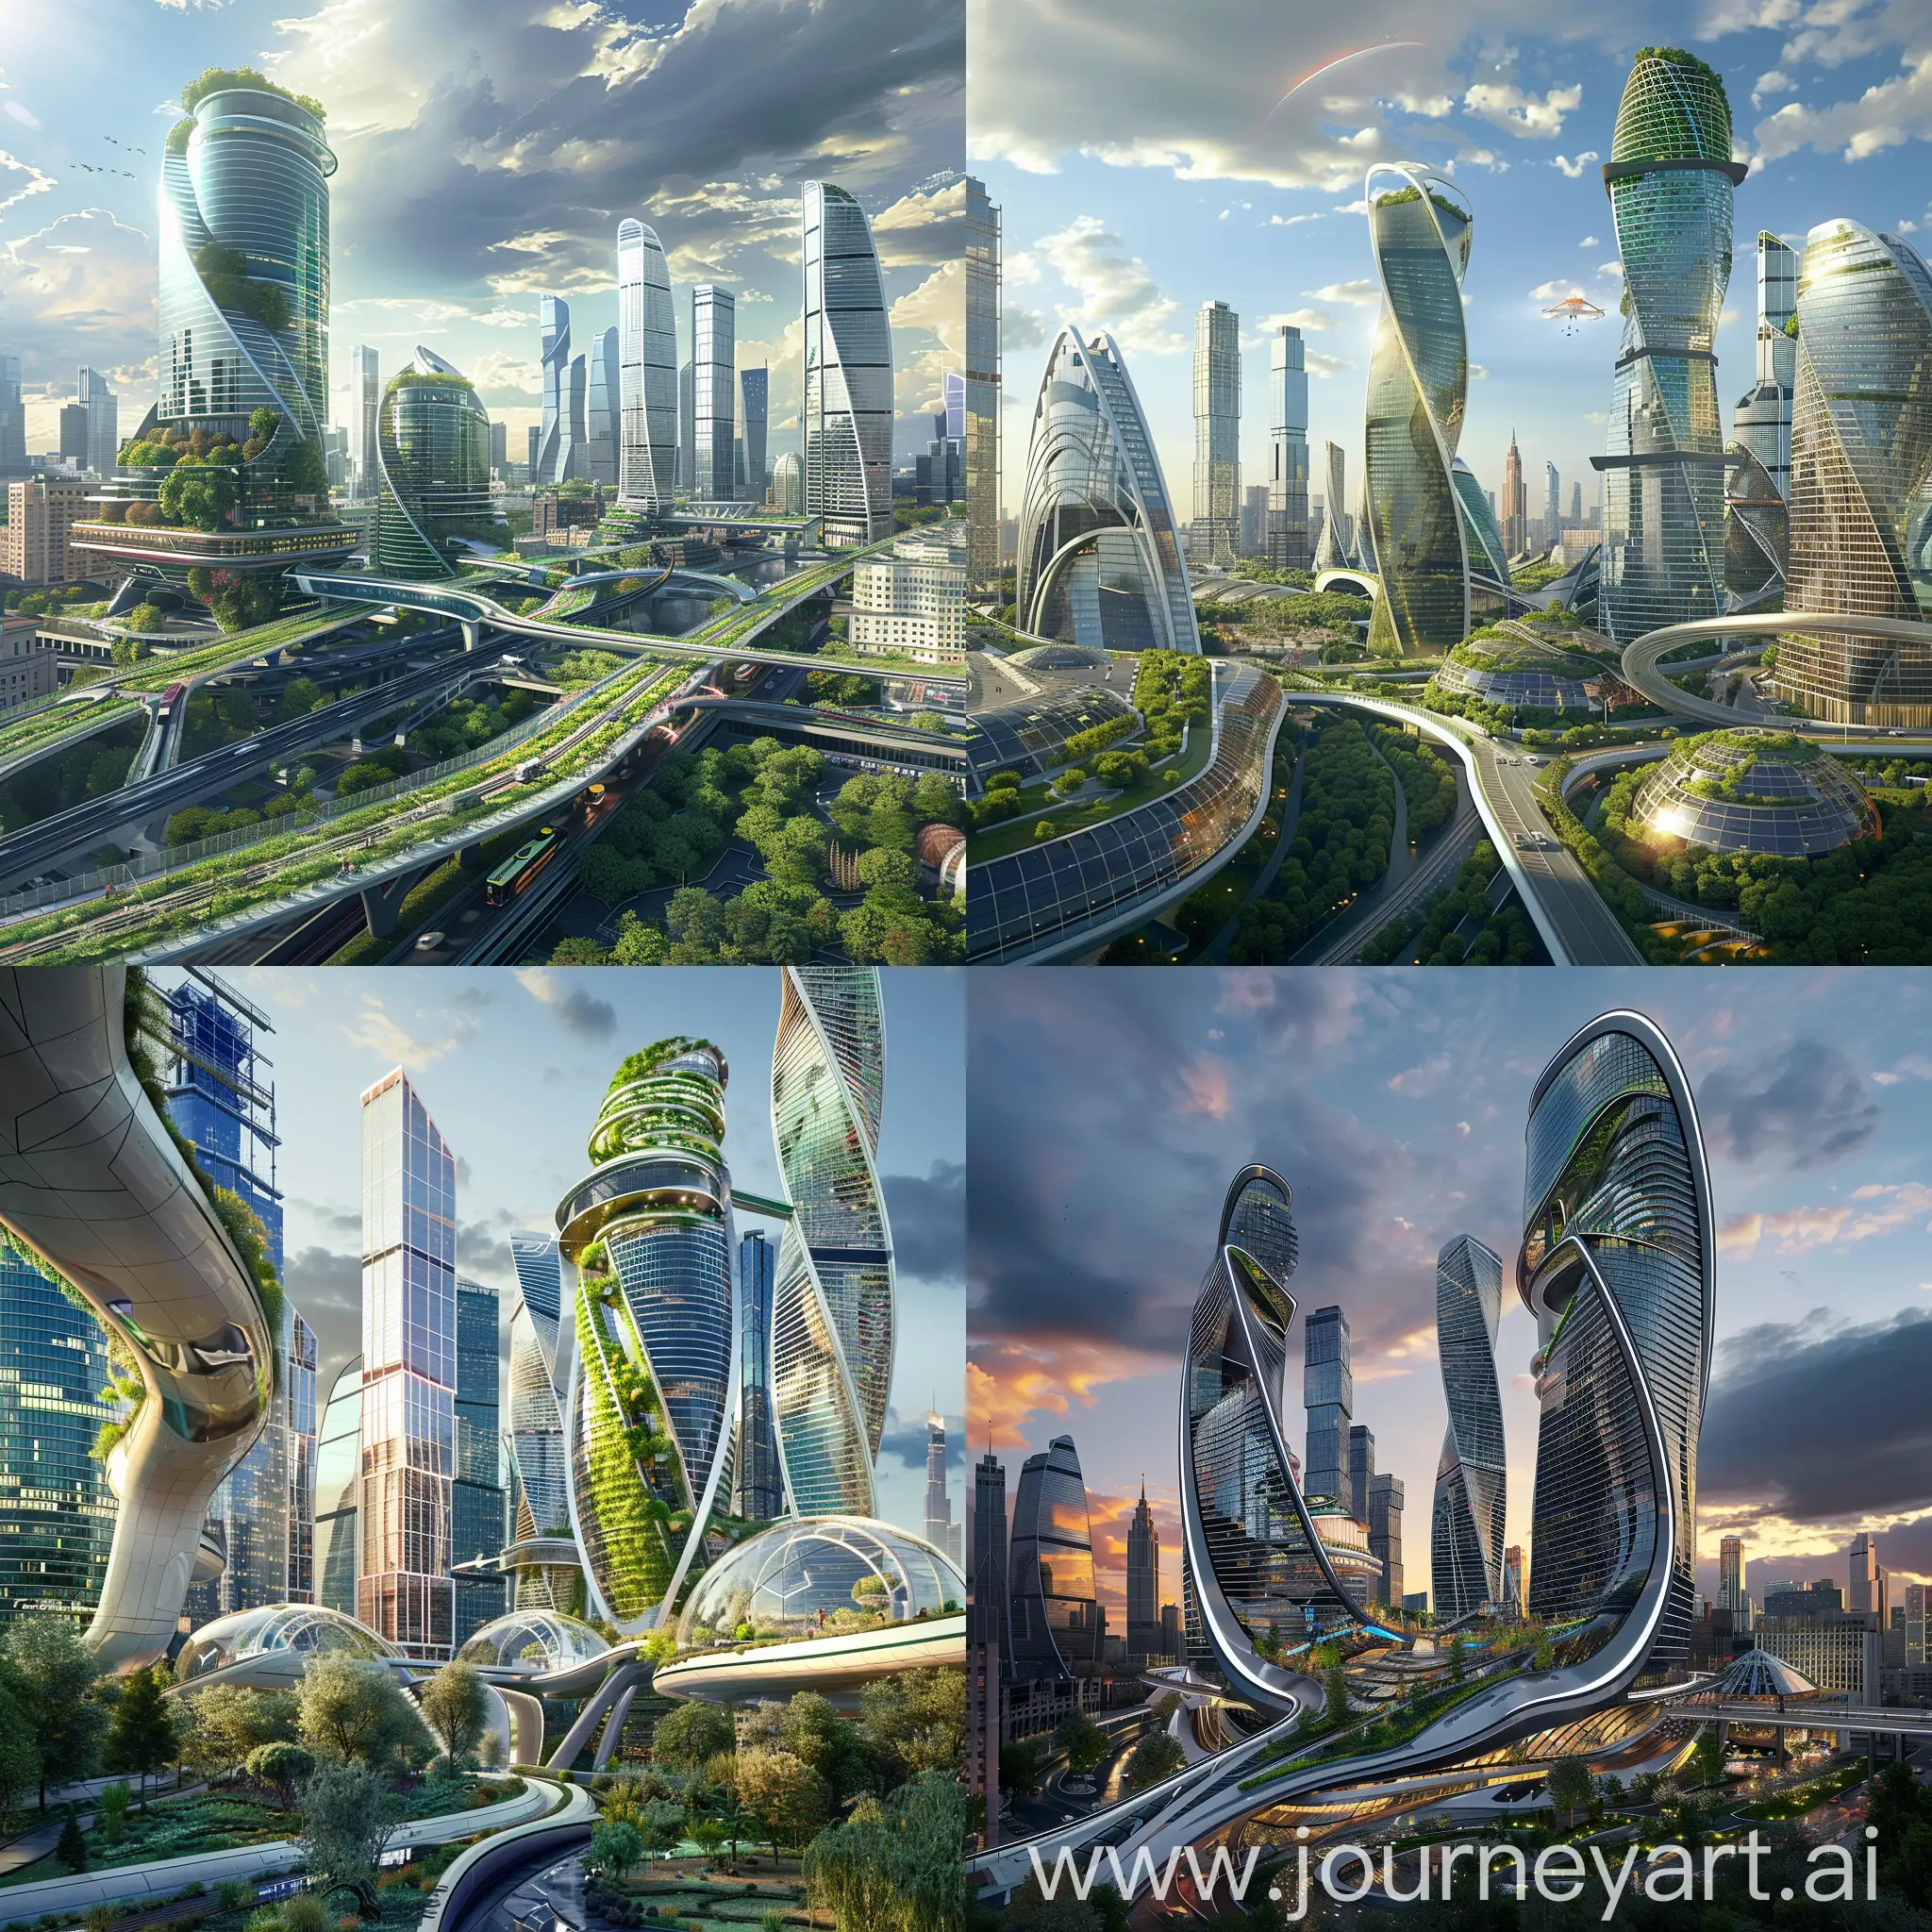 Futuristic-Moscow-SciFi-Inspired-Cityscape-with-Kinetic-Facades-and-Smart-Technology